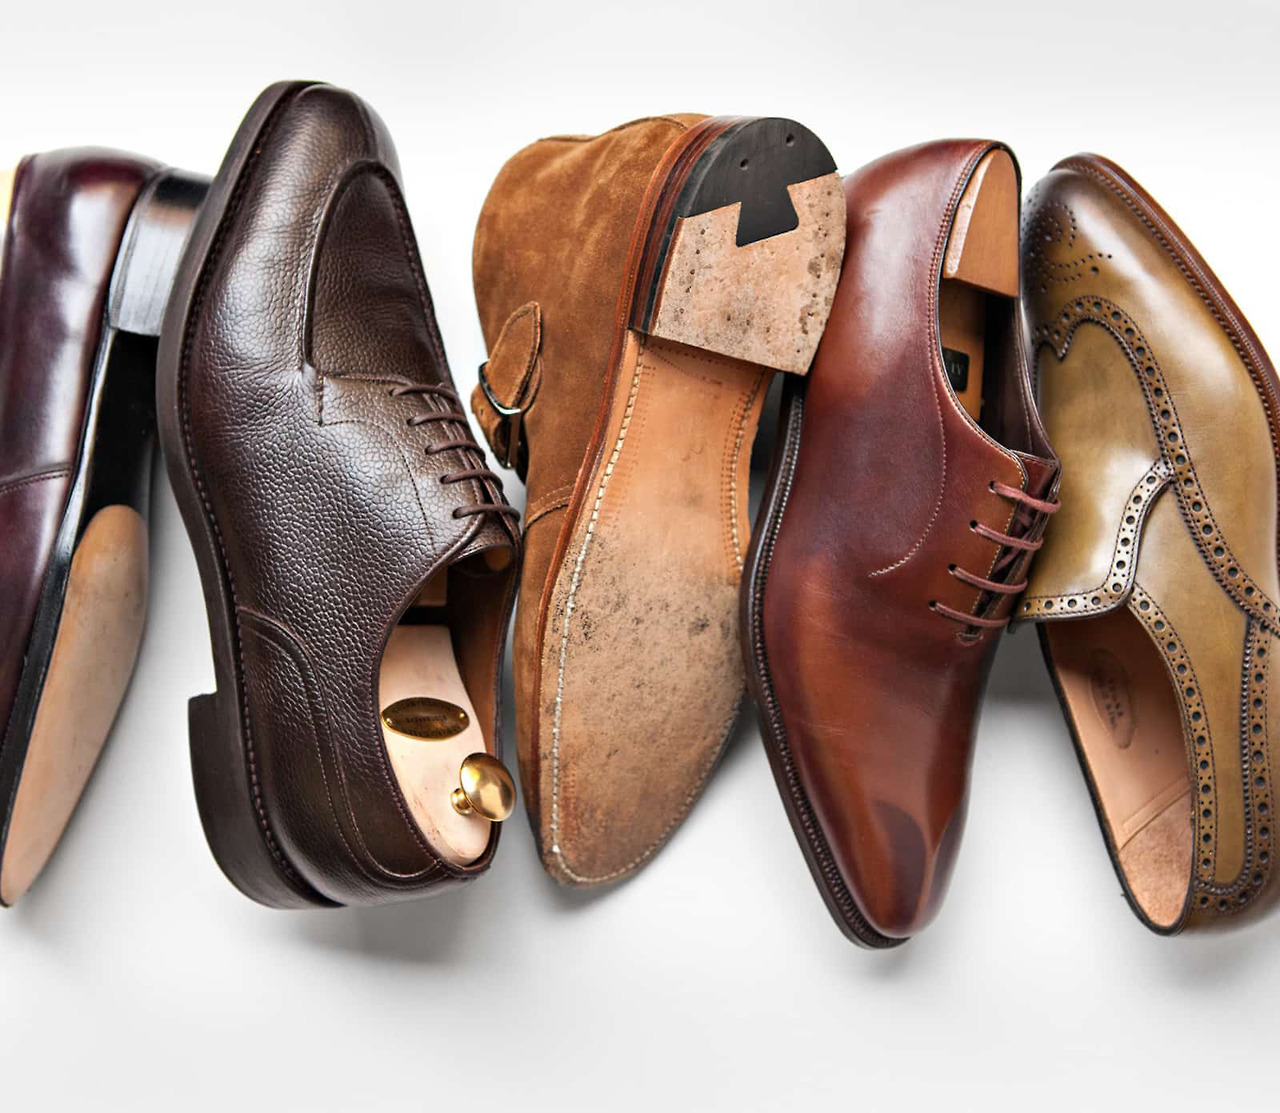 Leffot’s New Pre-Owned Footwear Program – Put This On